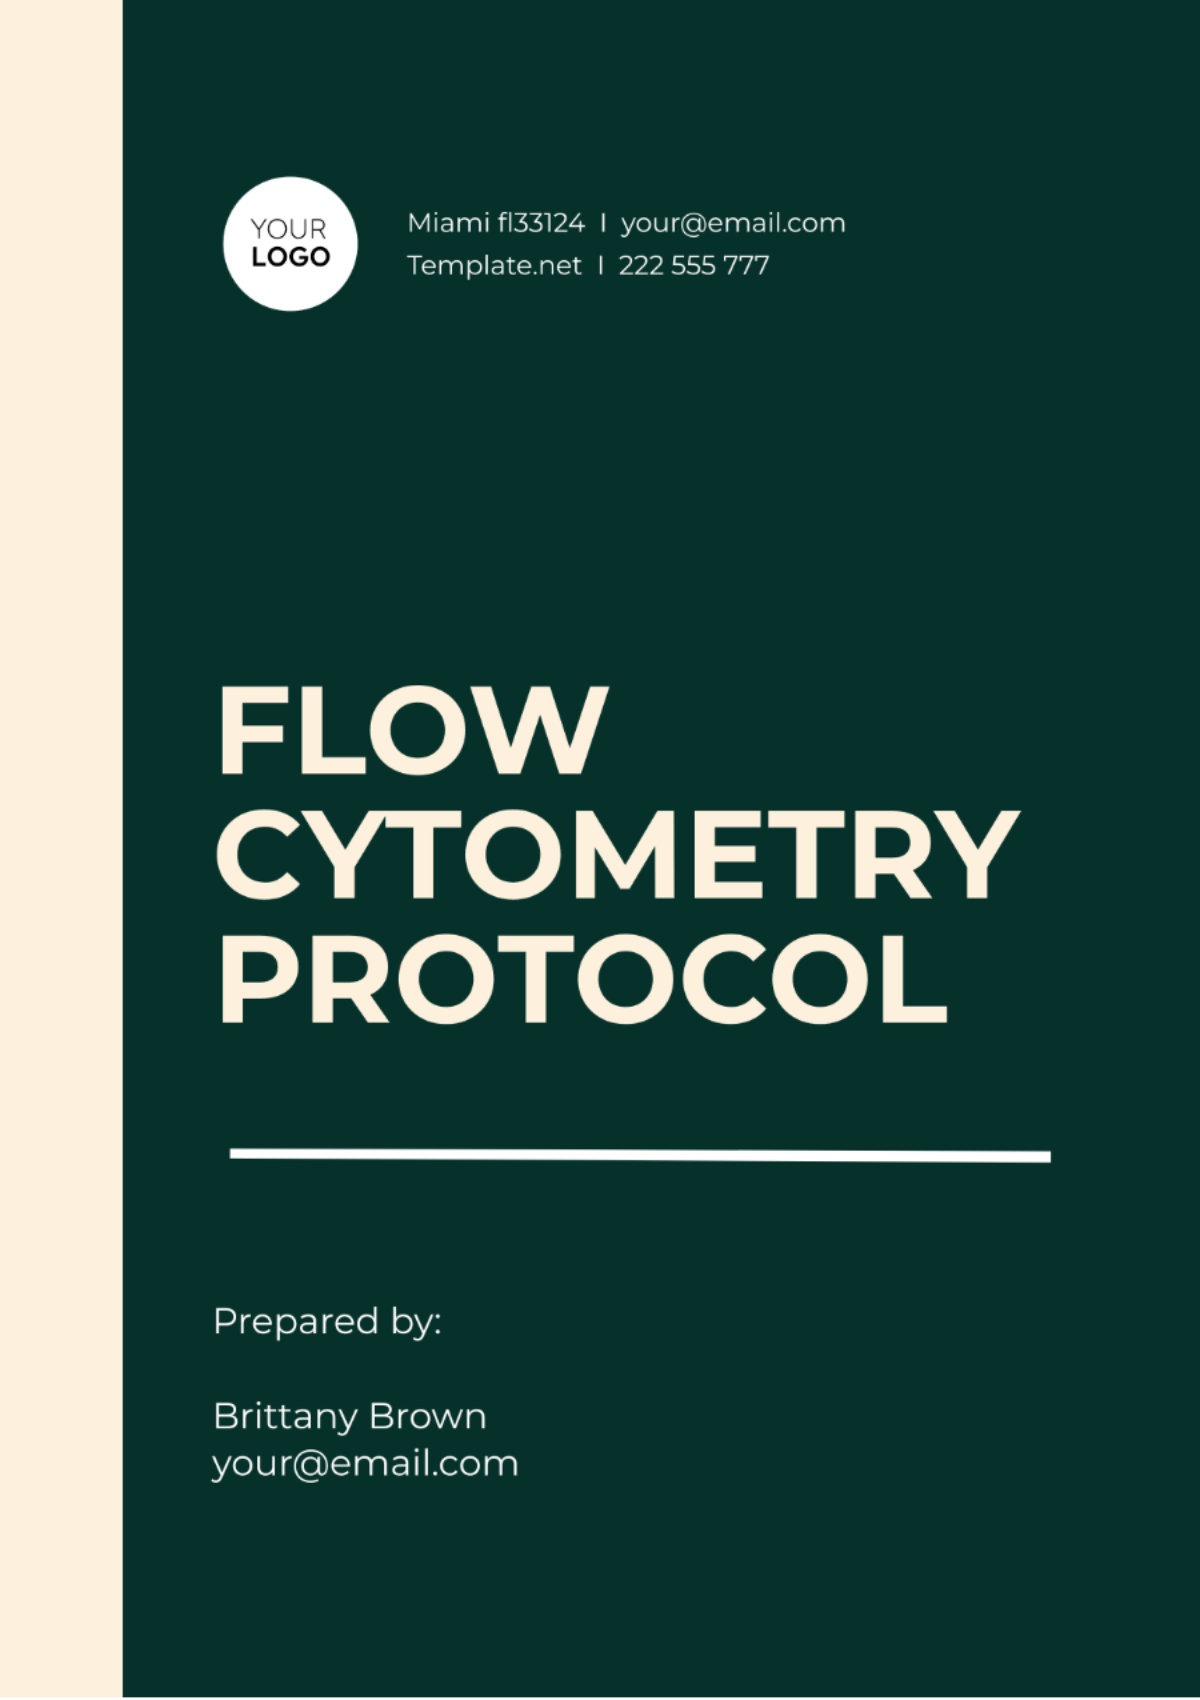 Free Flow Cytometry Protocol Template